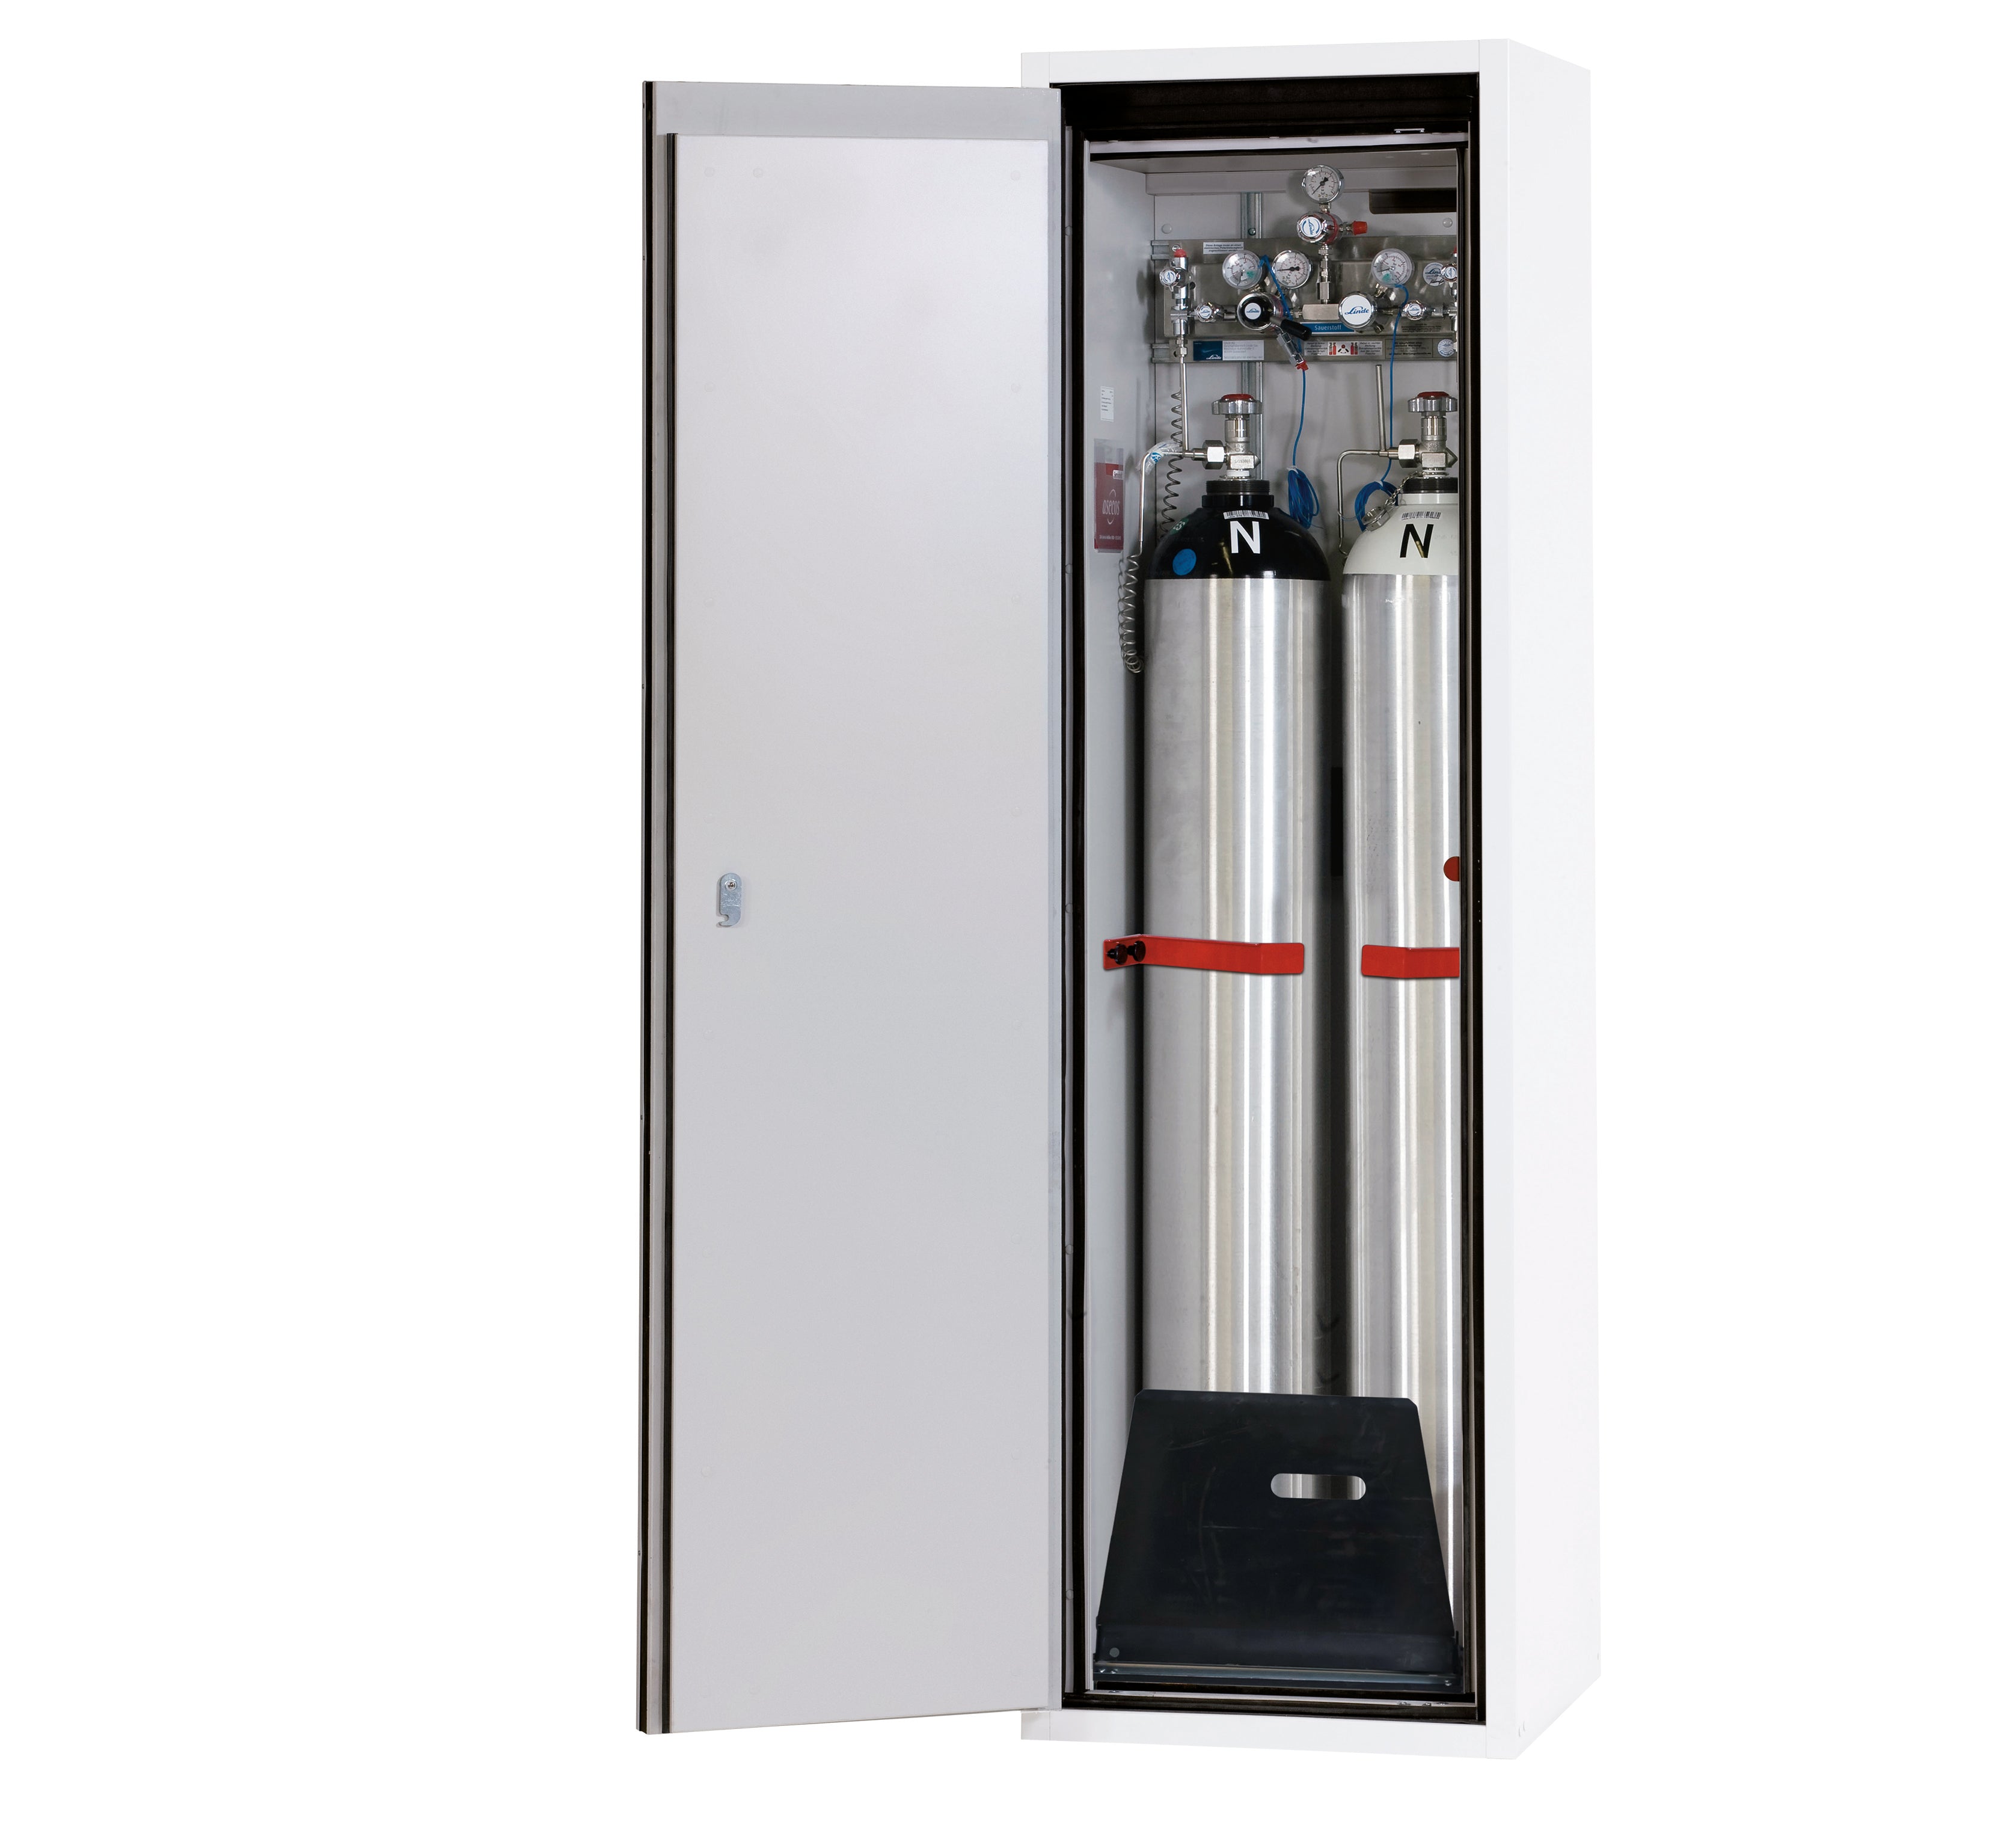 Type 90 compressed gas bottle cabinet G-ULTIMATE-90 model G90.205.060.2F in laboratory white (similar to RAL 9016) with standard interior fittings for 2x compressed gas bottles of 50 liters each